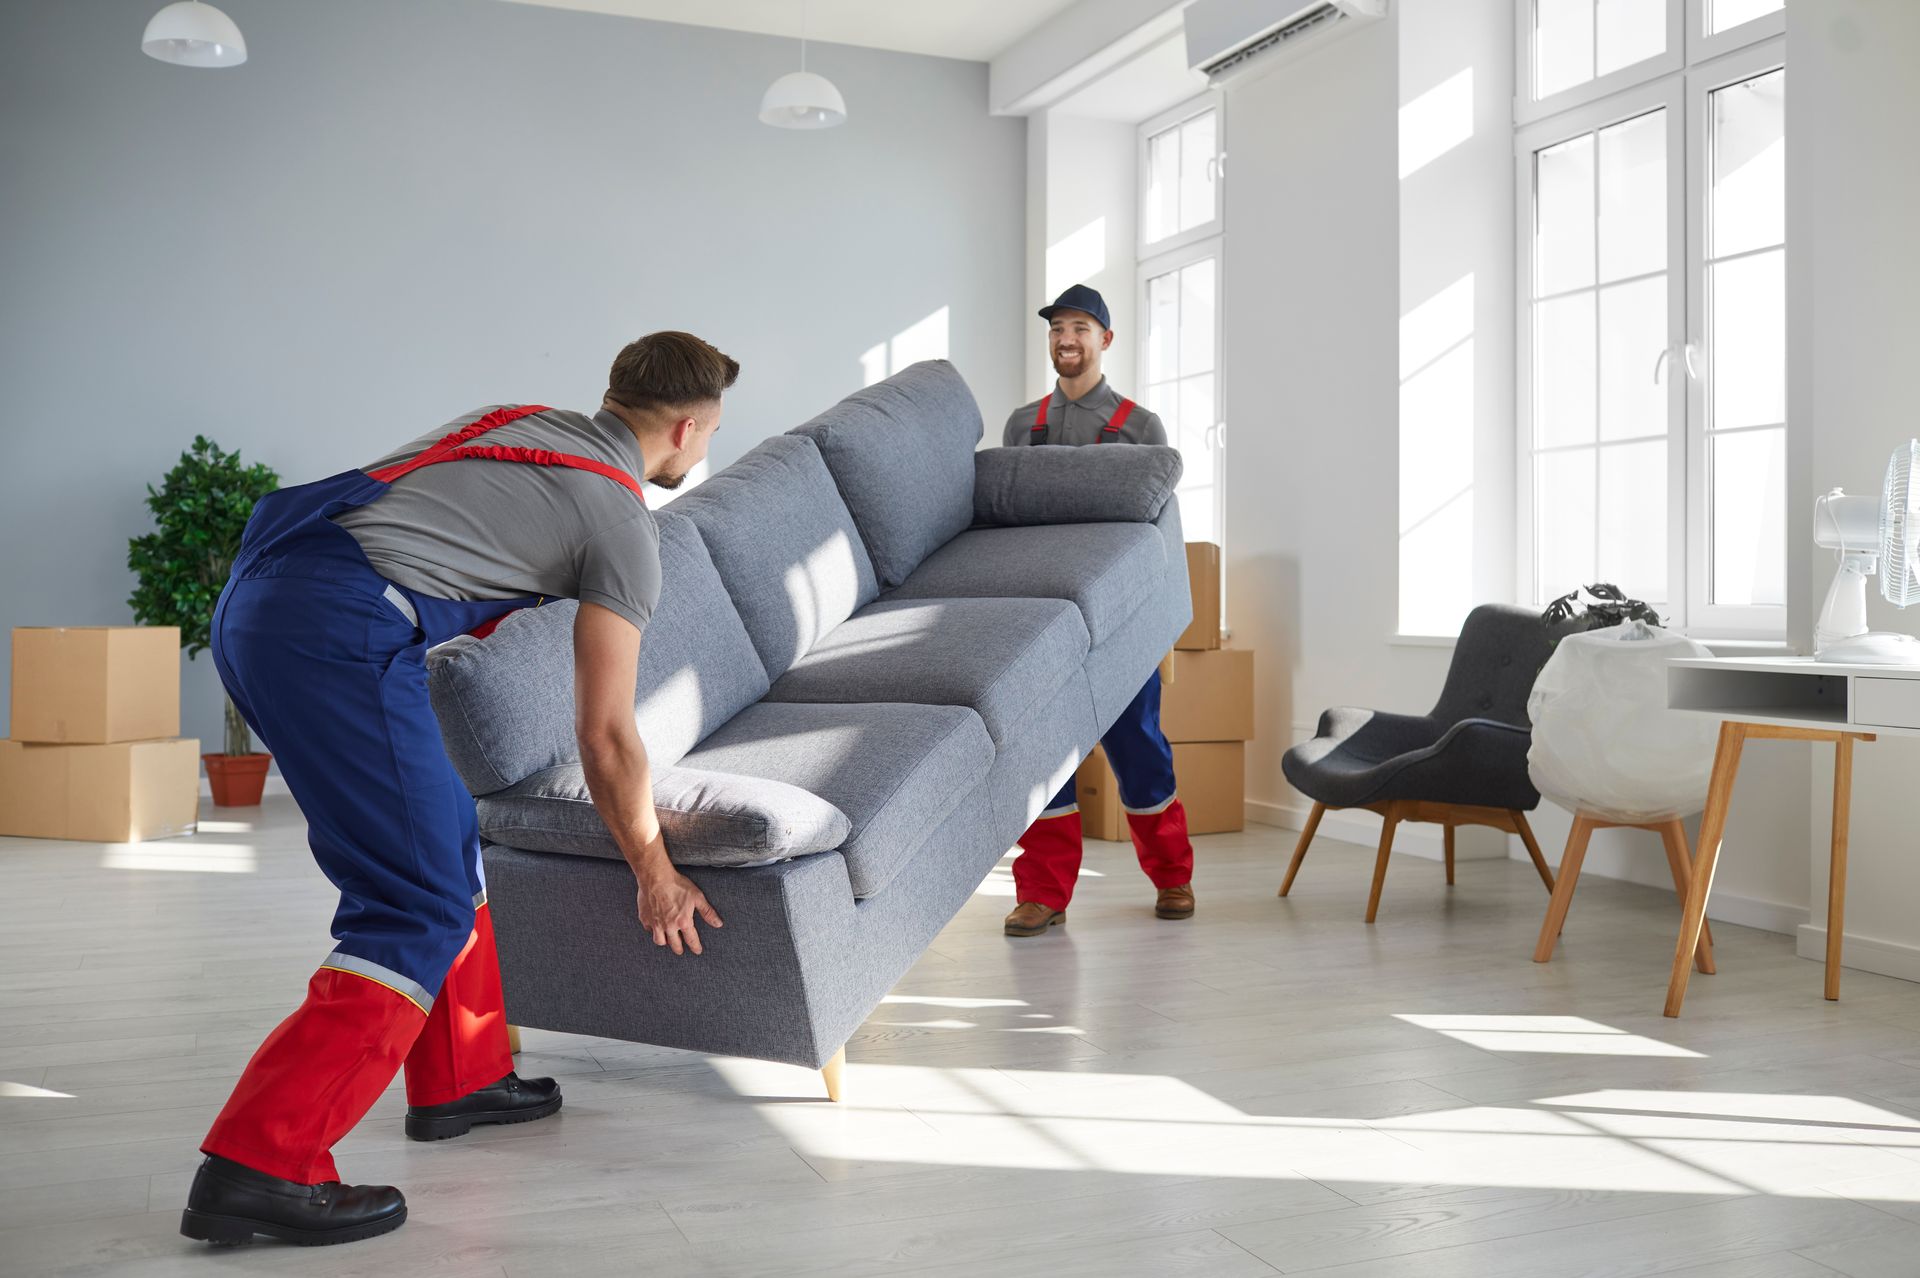 Two young workers lift up heavy sofa together